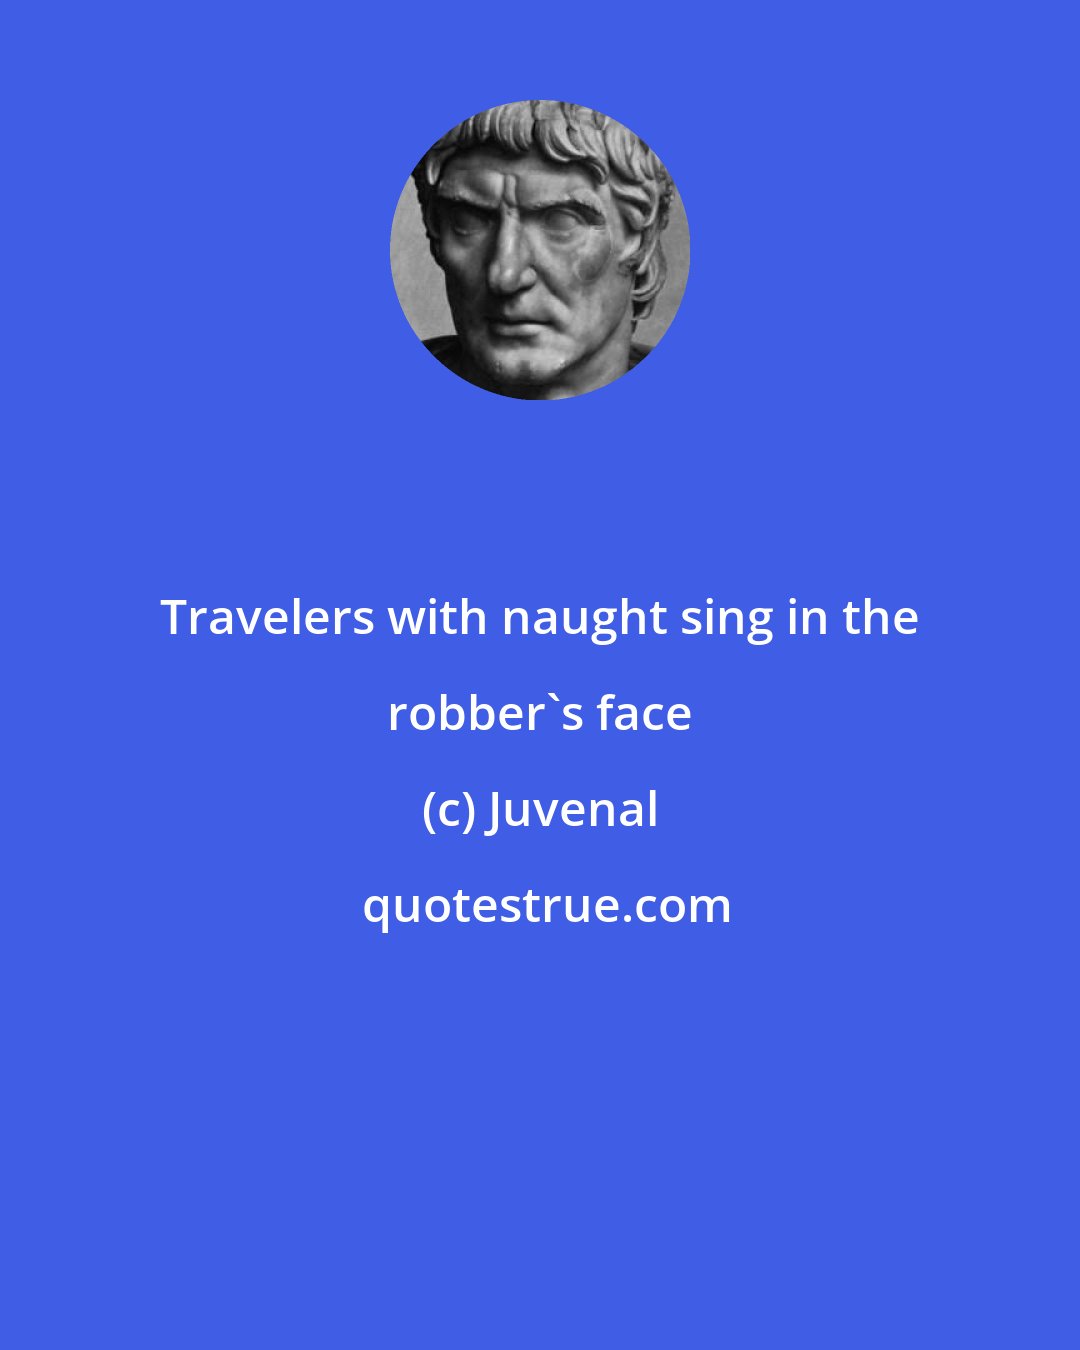 Juvenal: Travelers with naught sing in the robber's face